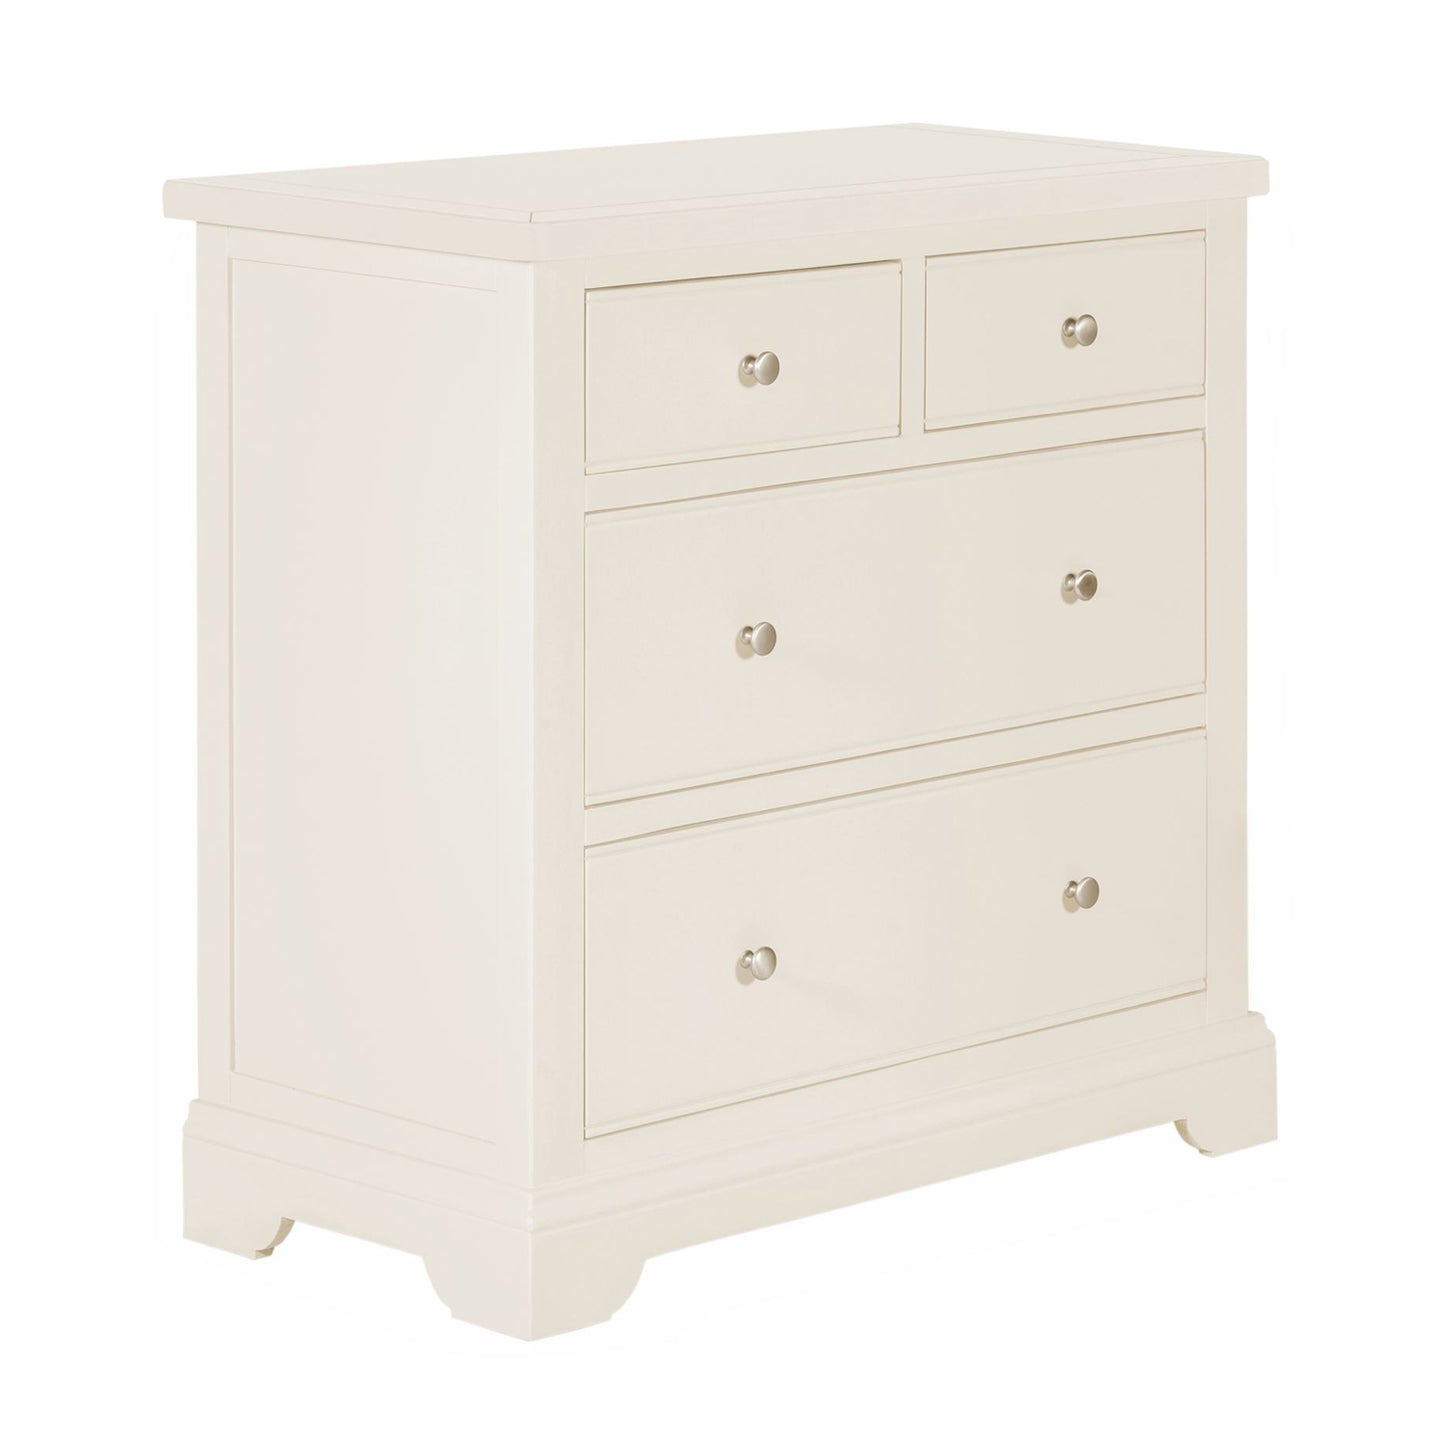 Hardingham White Painted Chest of Drawers - 2 Over 2